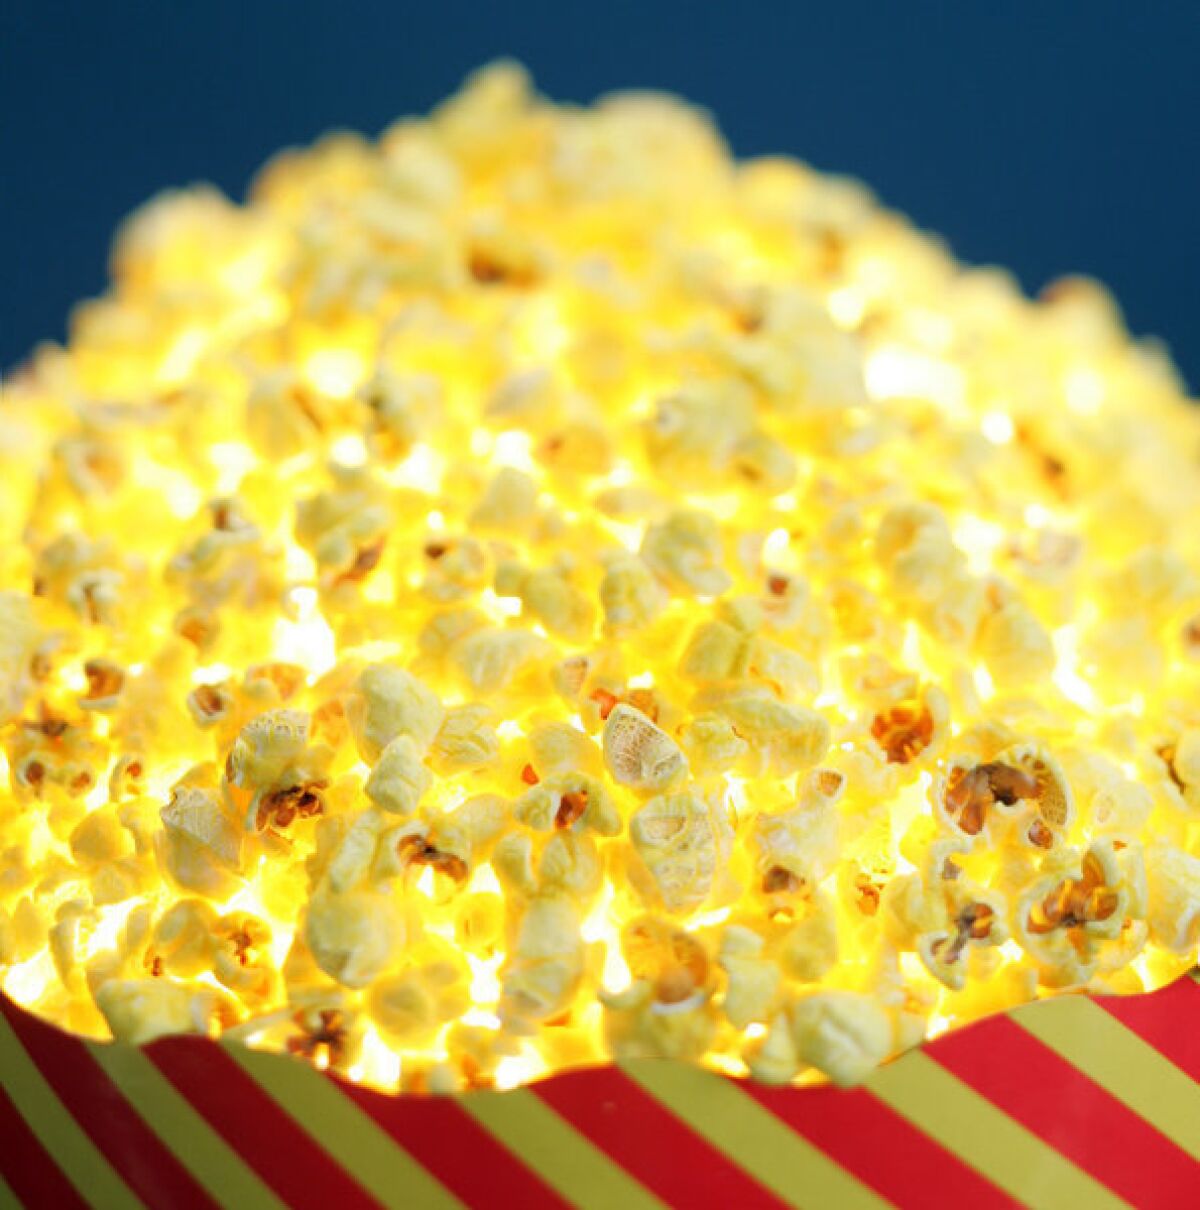 Ready-to-eat popcorn sales grew almost 12% in a 52-week period, while microwave popcorn sales rose less than 1%, according to Information Resources Inc.